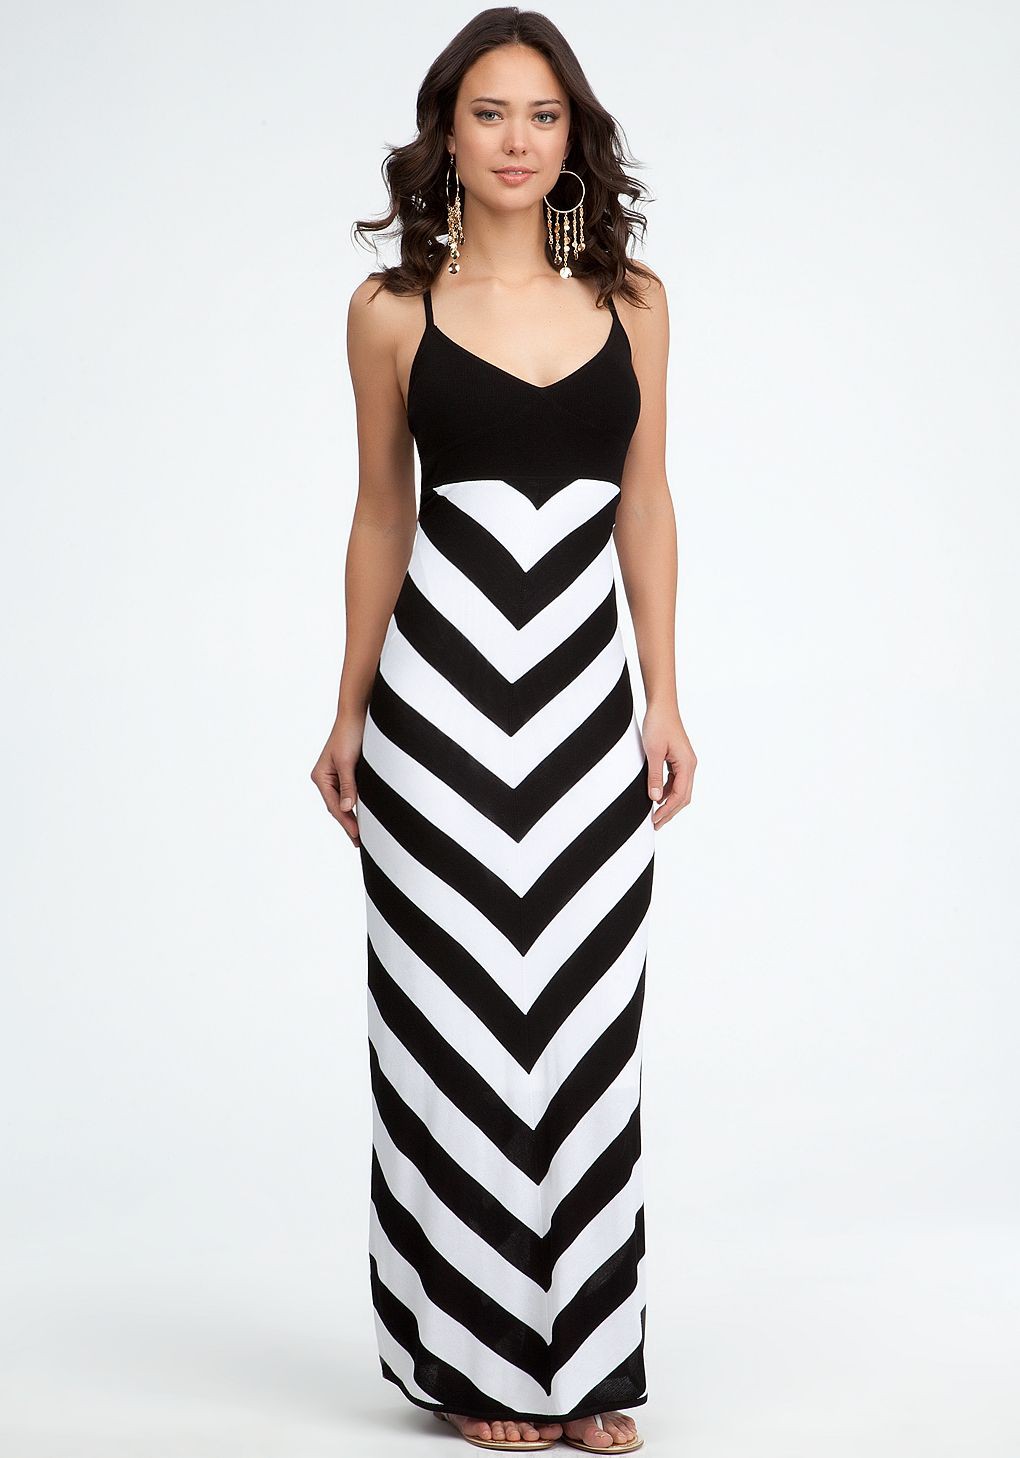 Maxi dress black and white chevron | Shoes With A Maxi Dress | cocktail ...